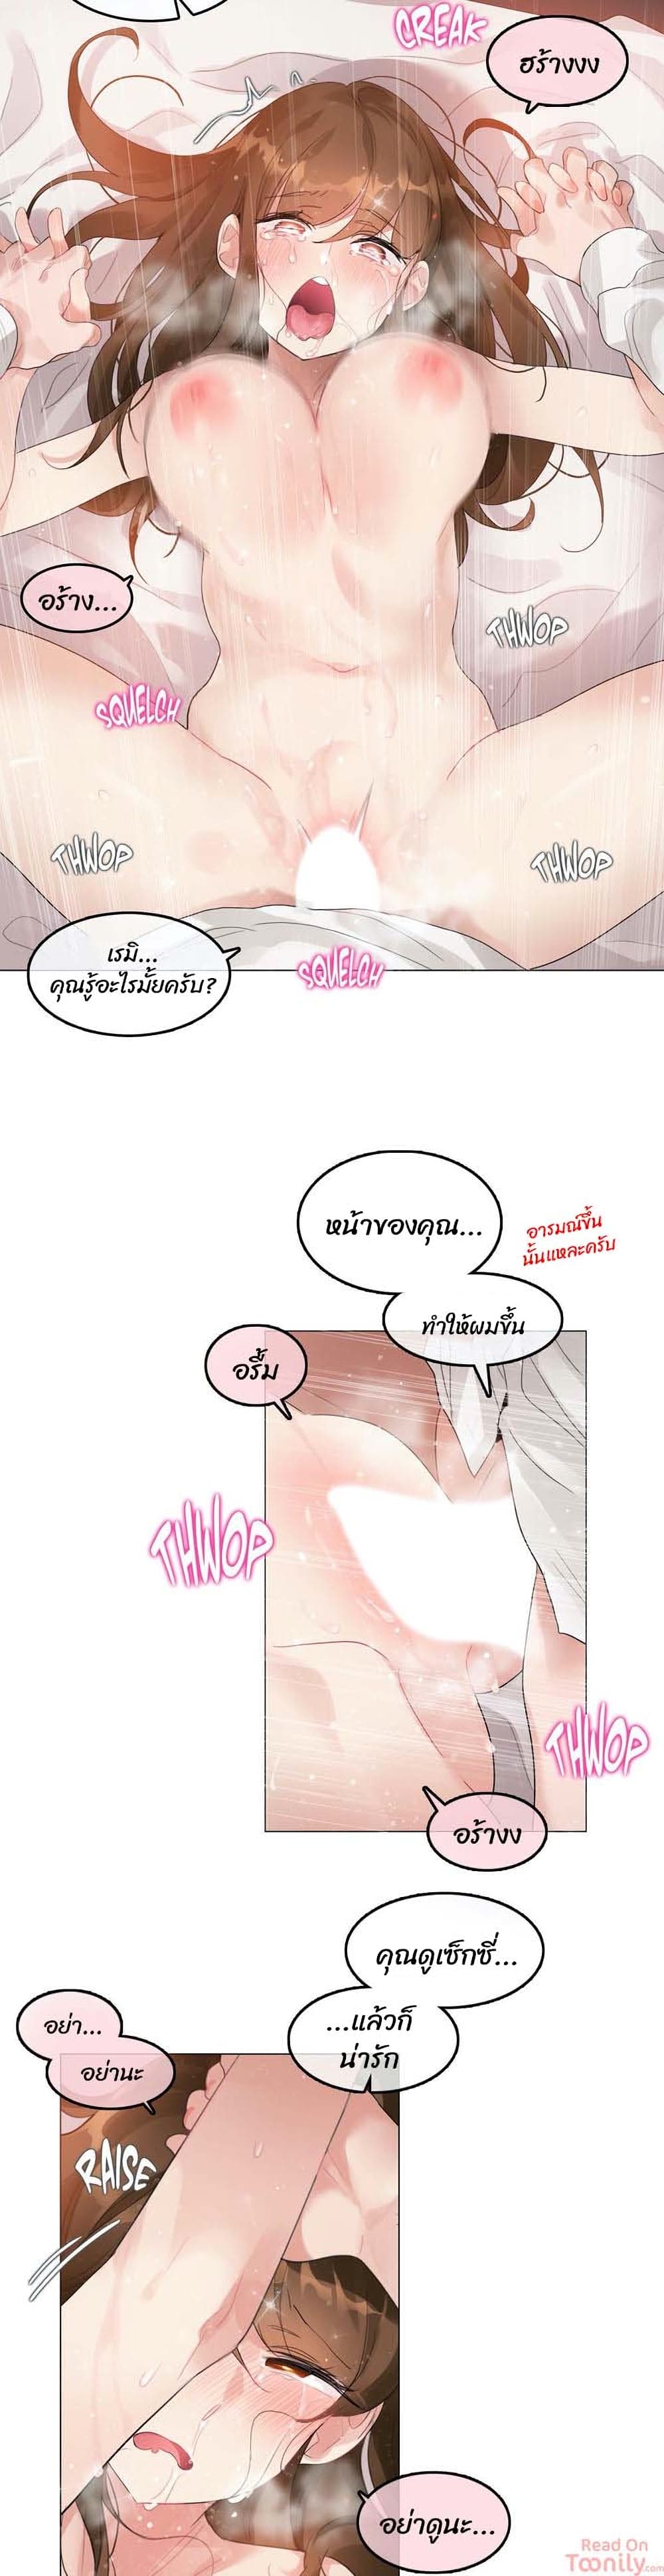 A Pervert's Daily Life 82 (9)